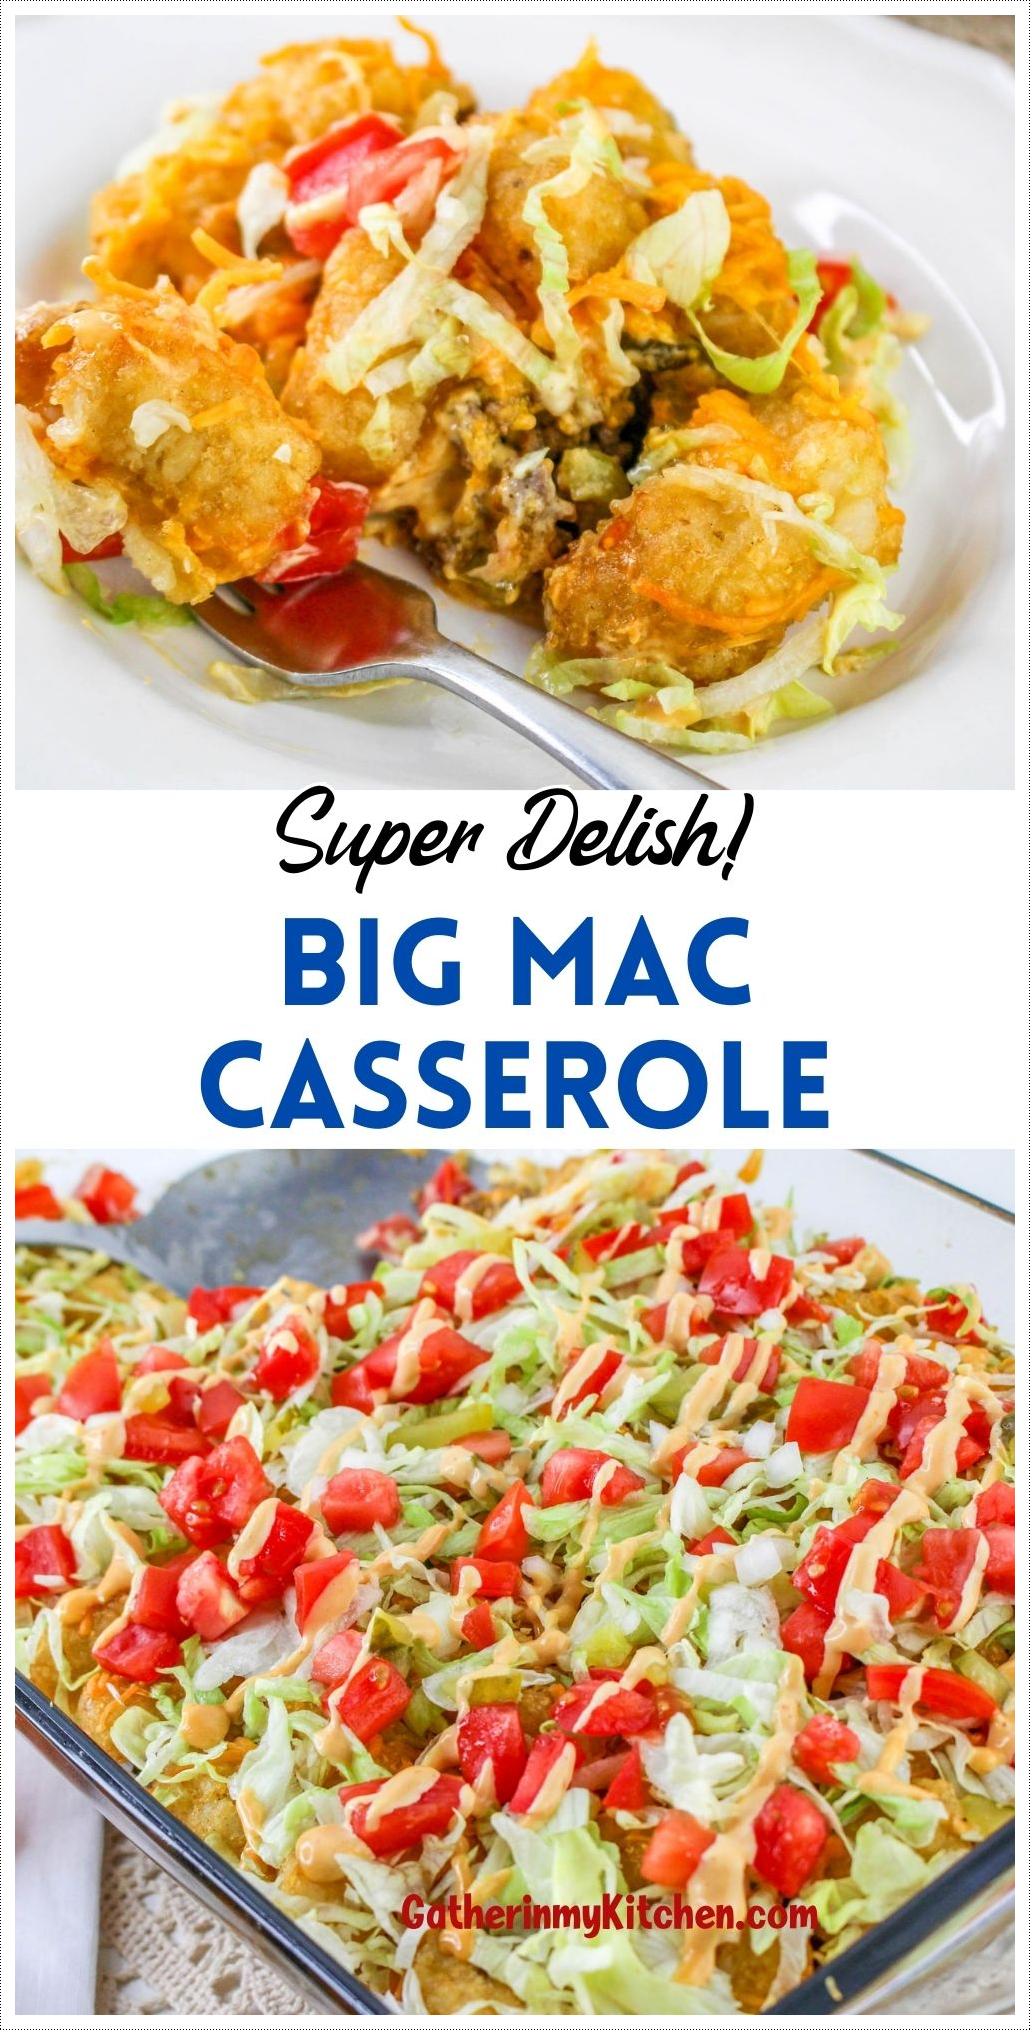 Pin image: top and bottom pics of big mac casserole and middle says "Super Delish Big Mac Casserole.